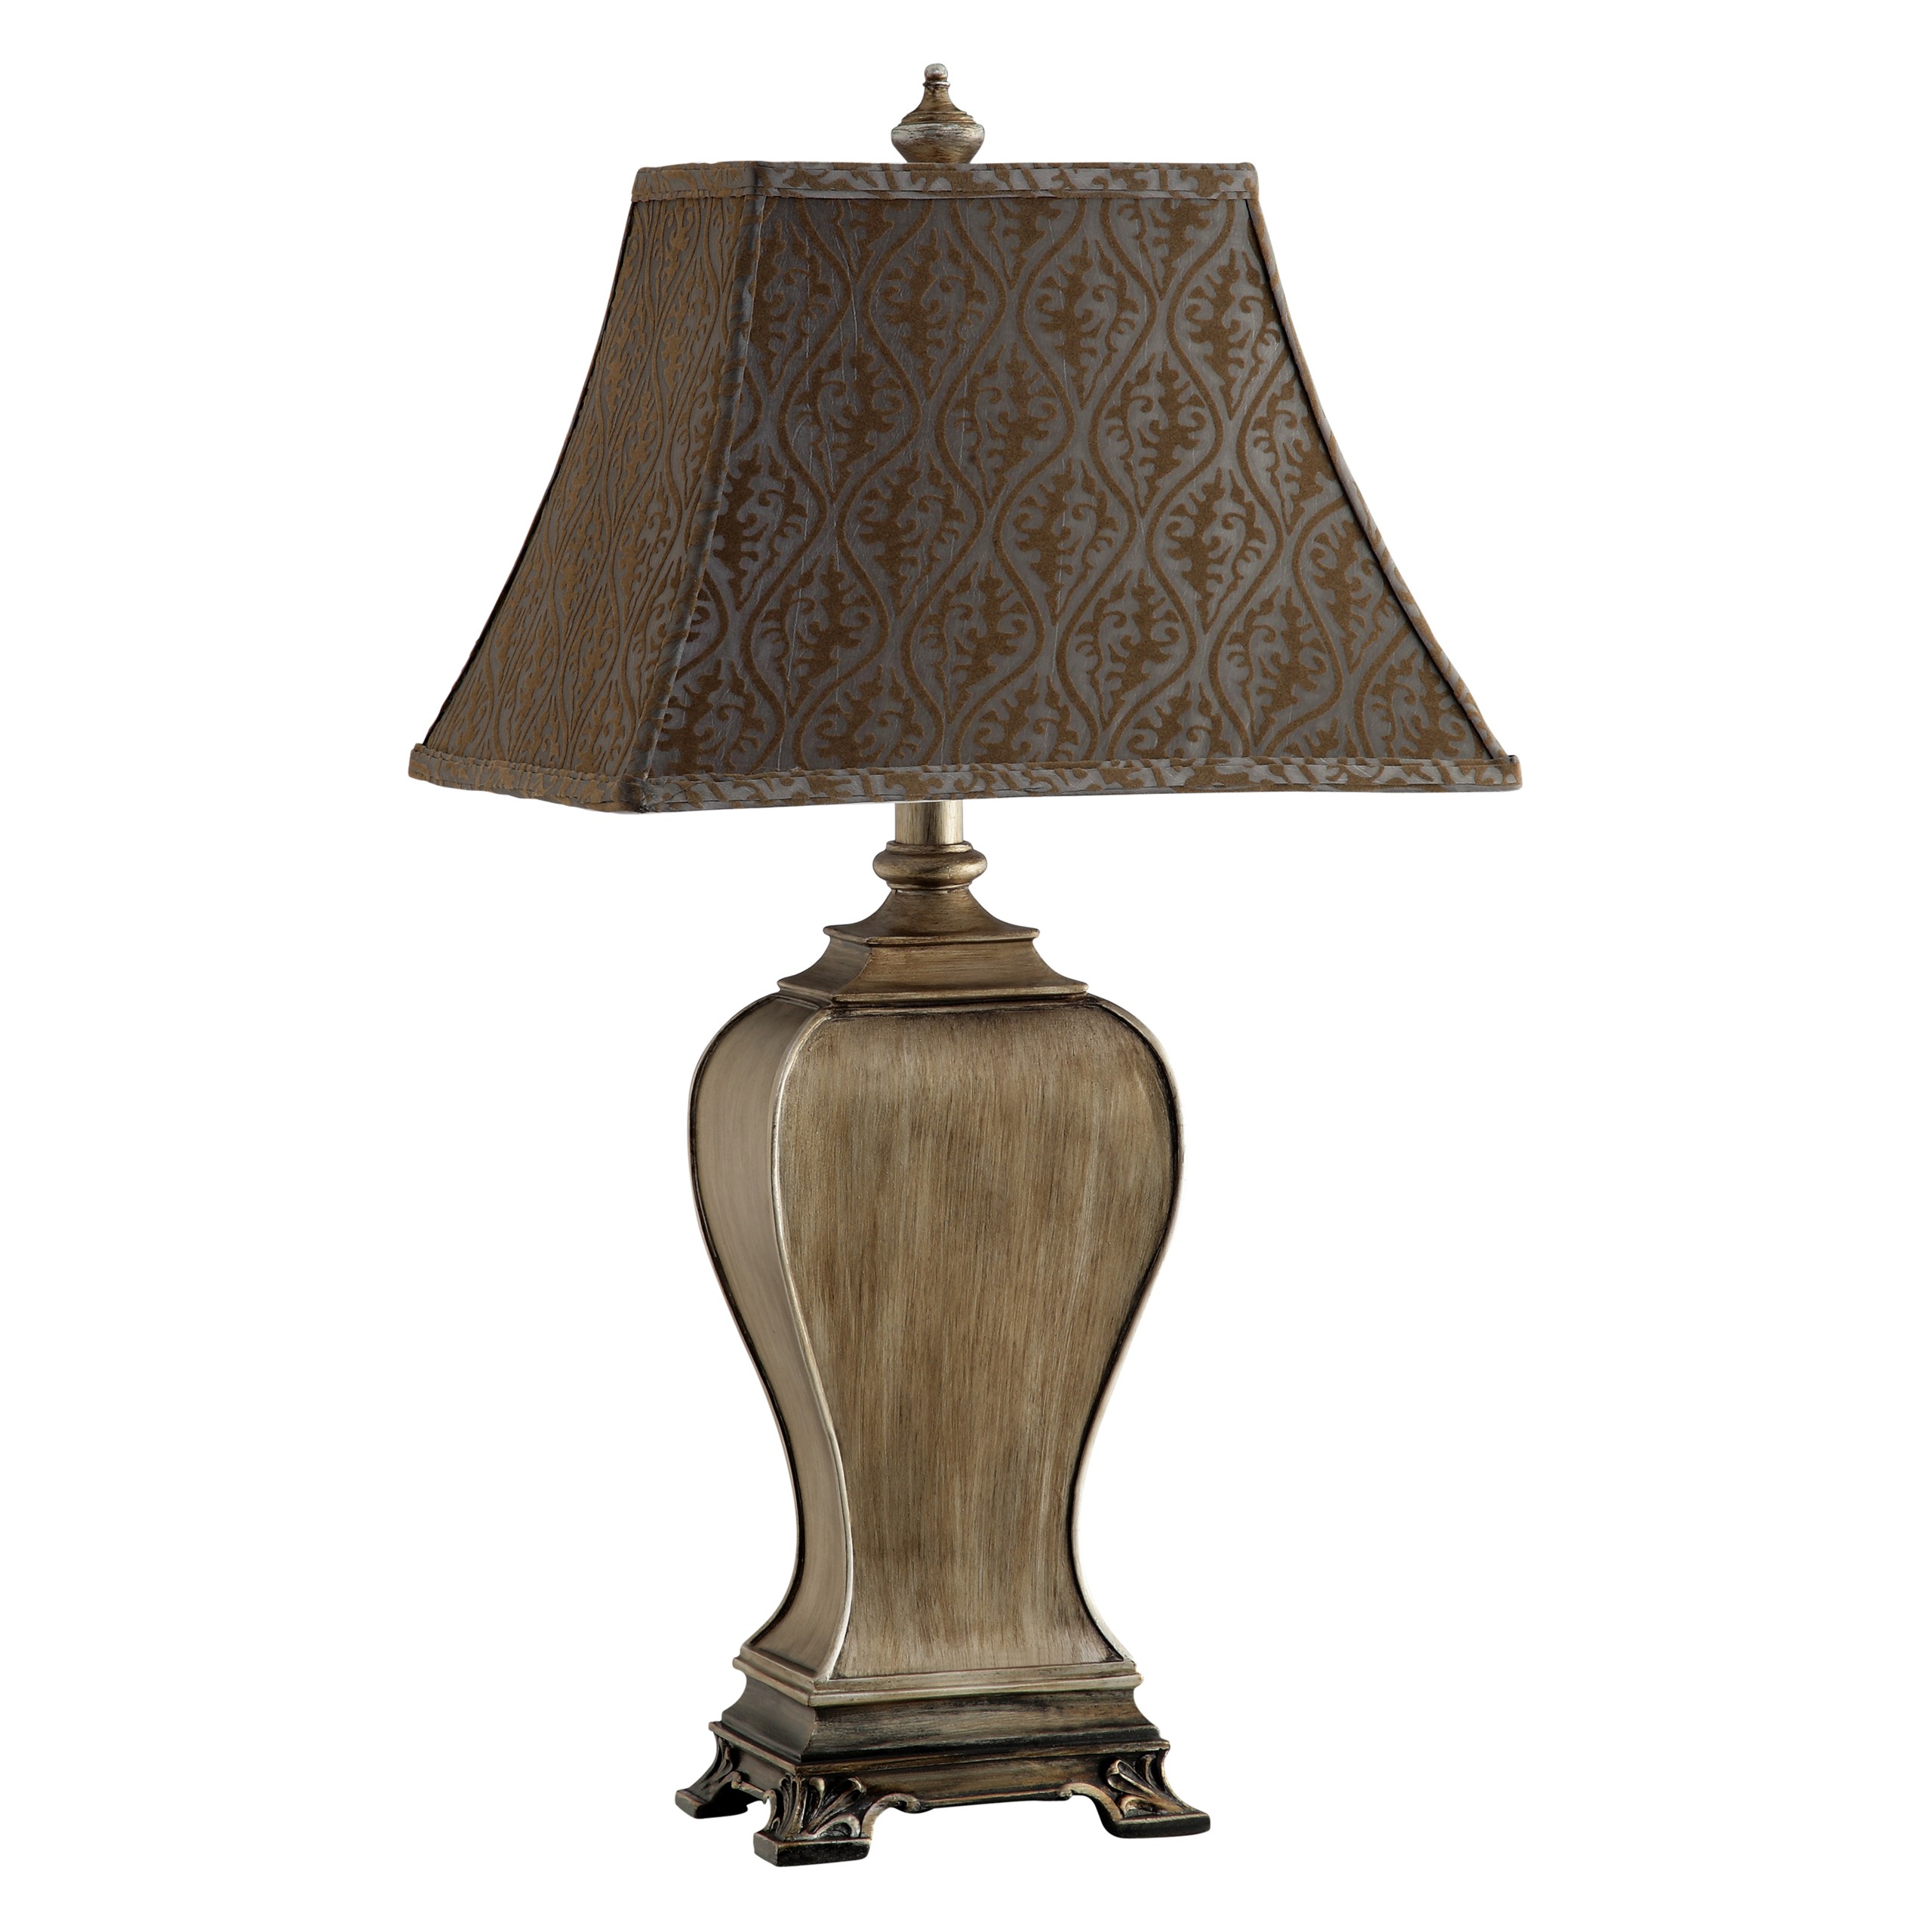 Accent 32" H Lighting Ginger Jar Table Lamp with Bell Shade